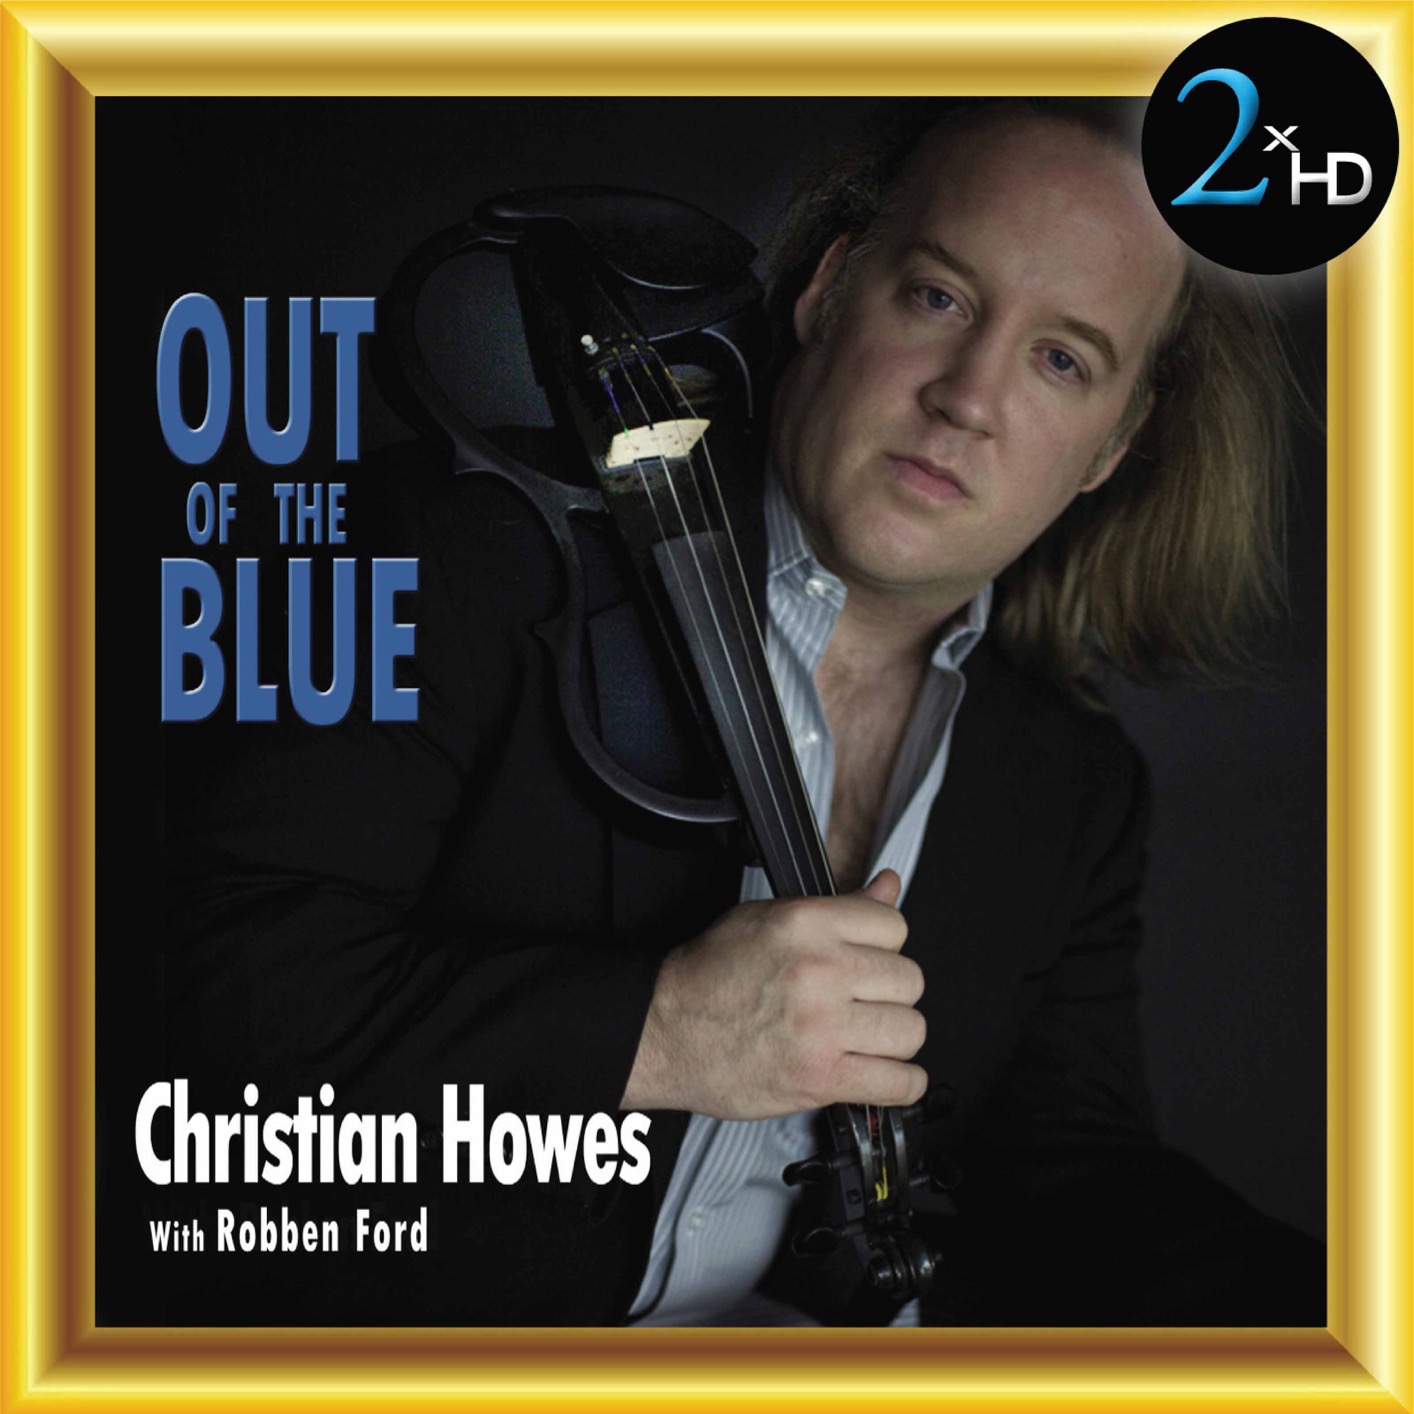 Christian Howes & Robben Ford – Out of the Blue (2010/2017) [FLAC 24bit/44,1kHz]